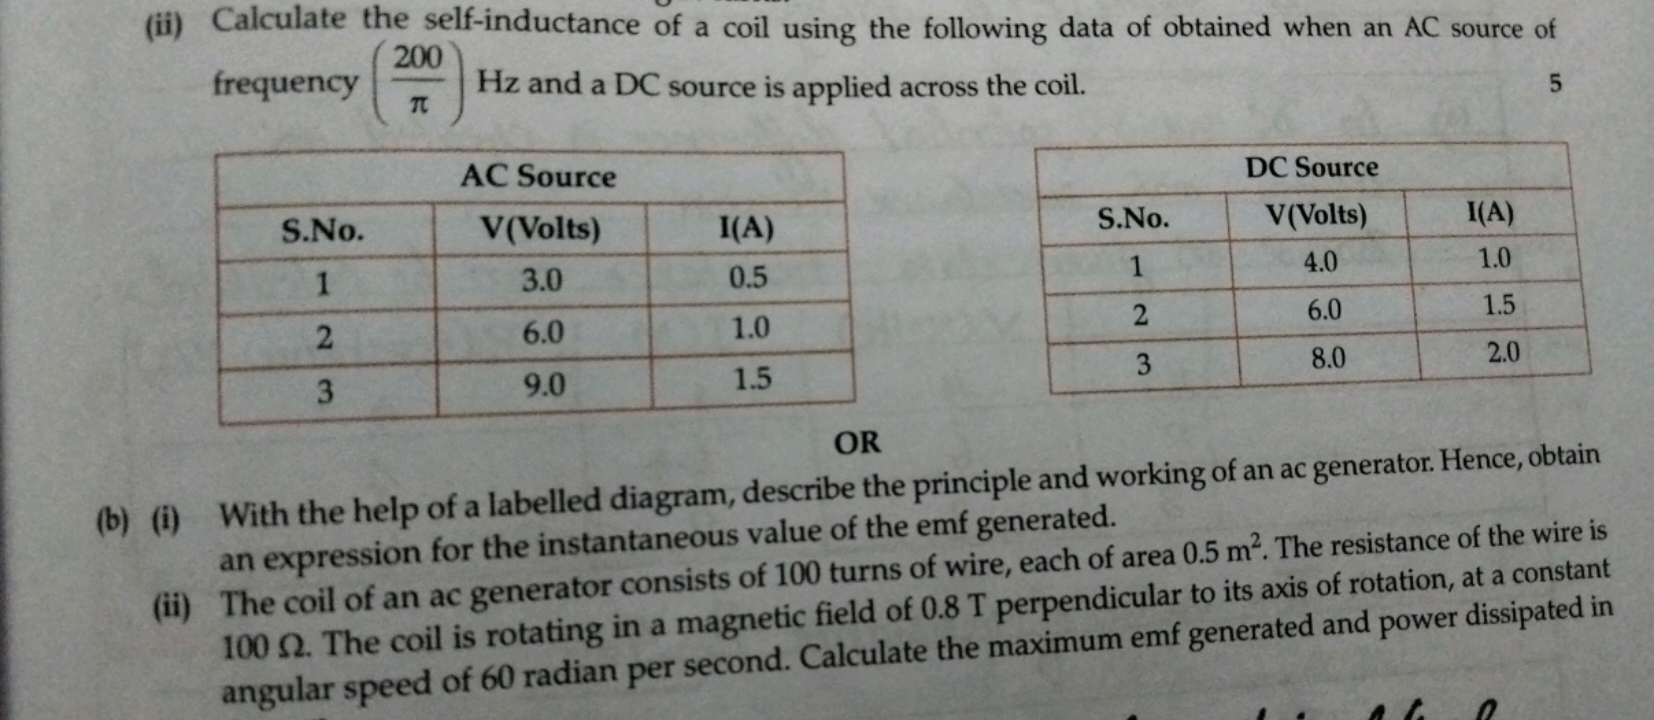 (ii) Calculate the self-inductance of a coil using the following data 